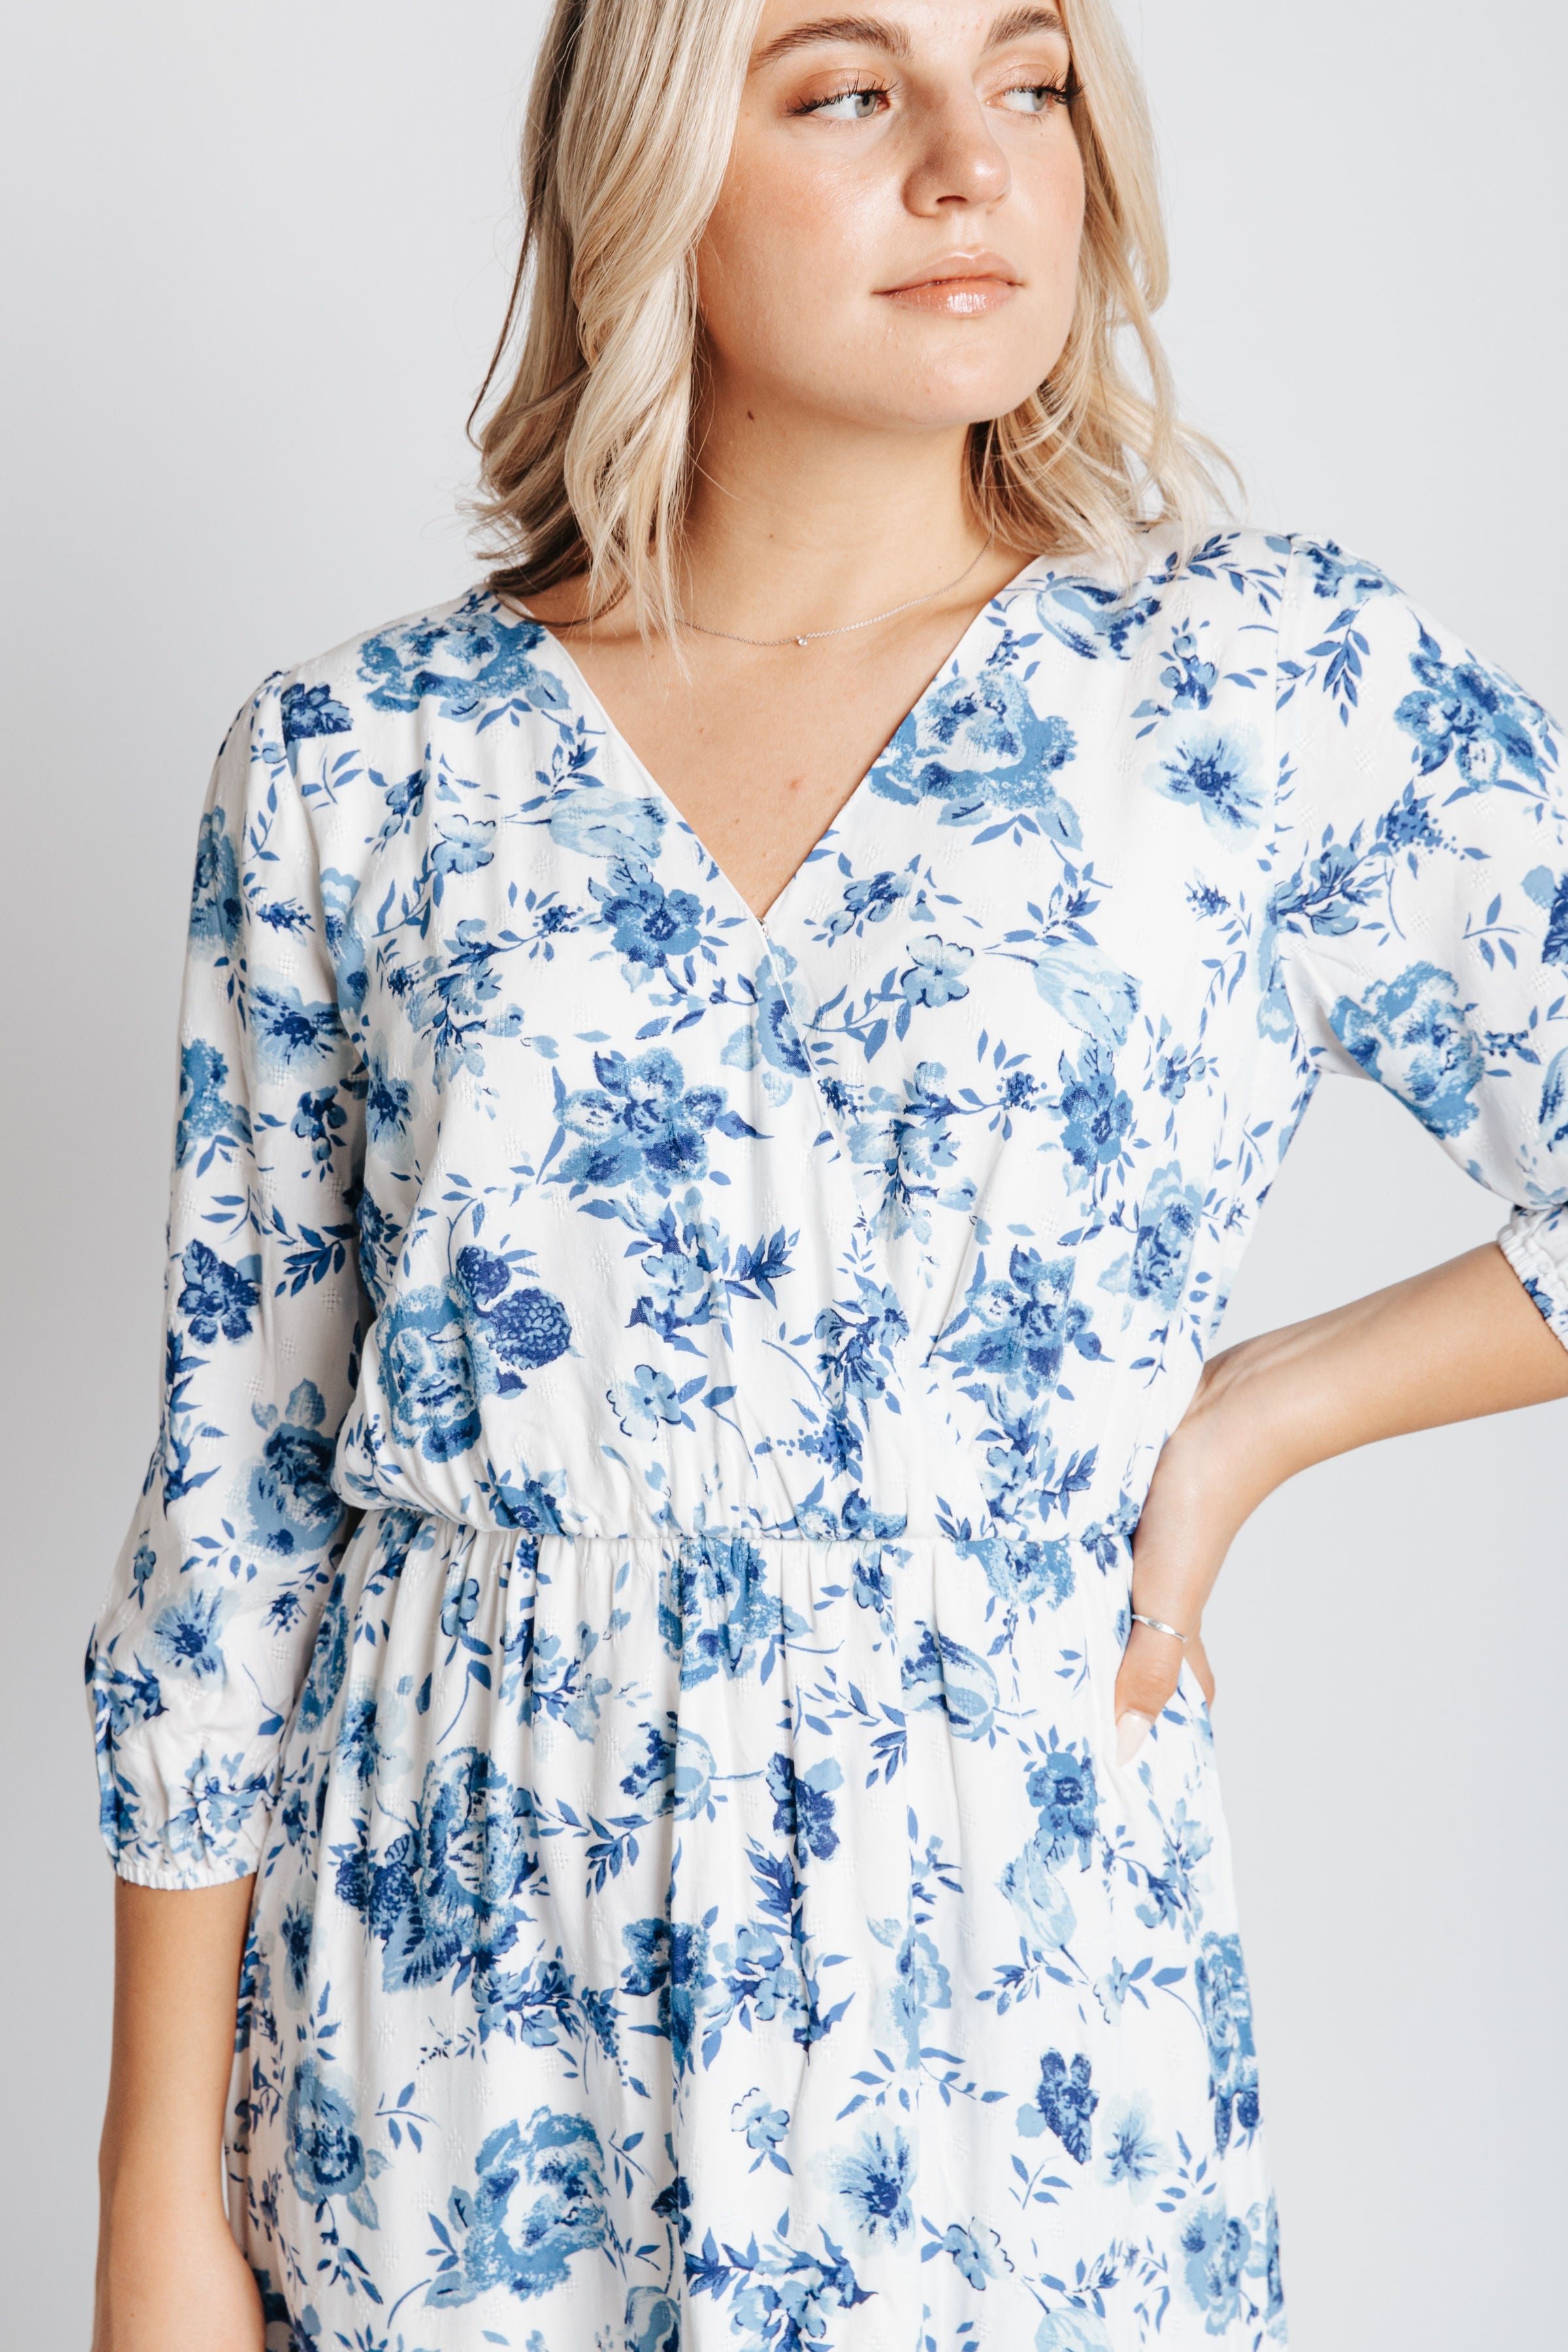 Piper & Scoot: The Raya Floral Print Midi Dress in Ivory + Blue